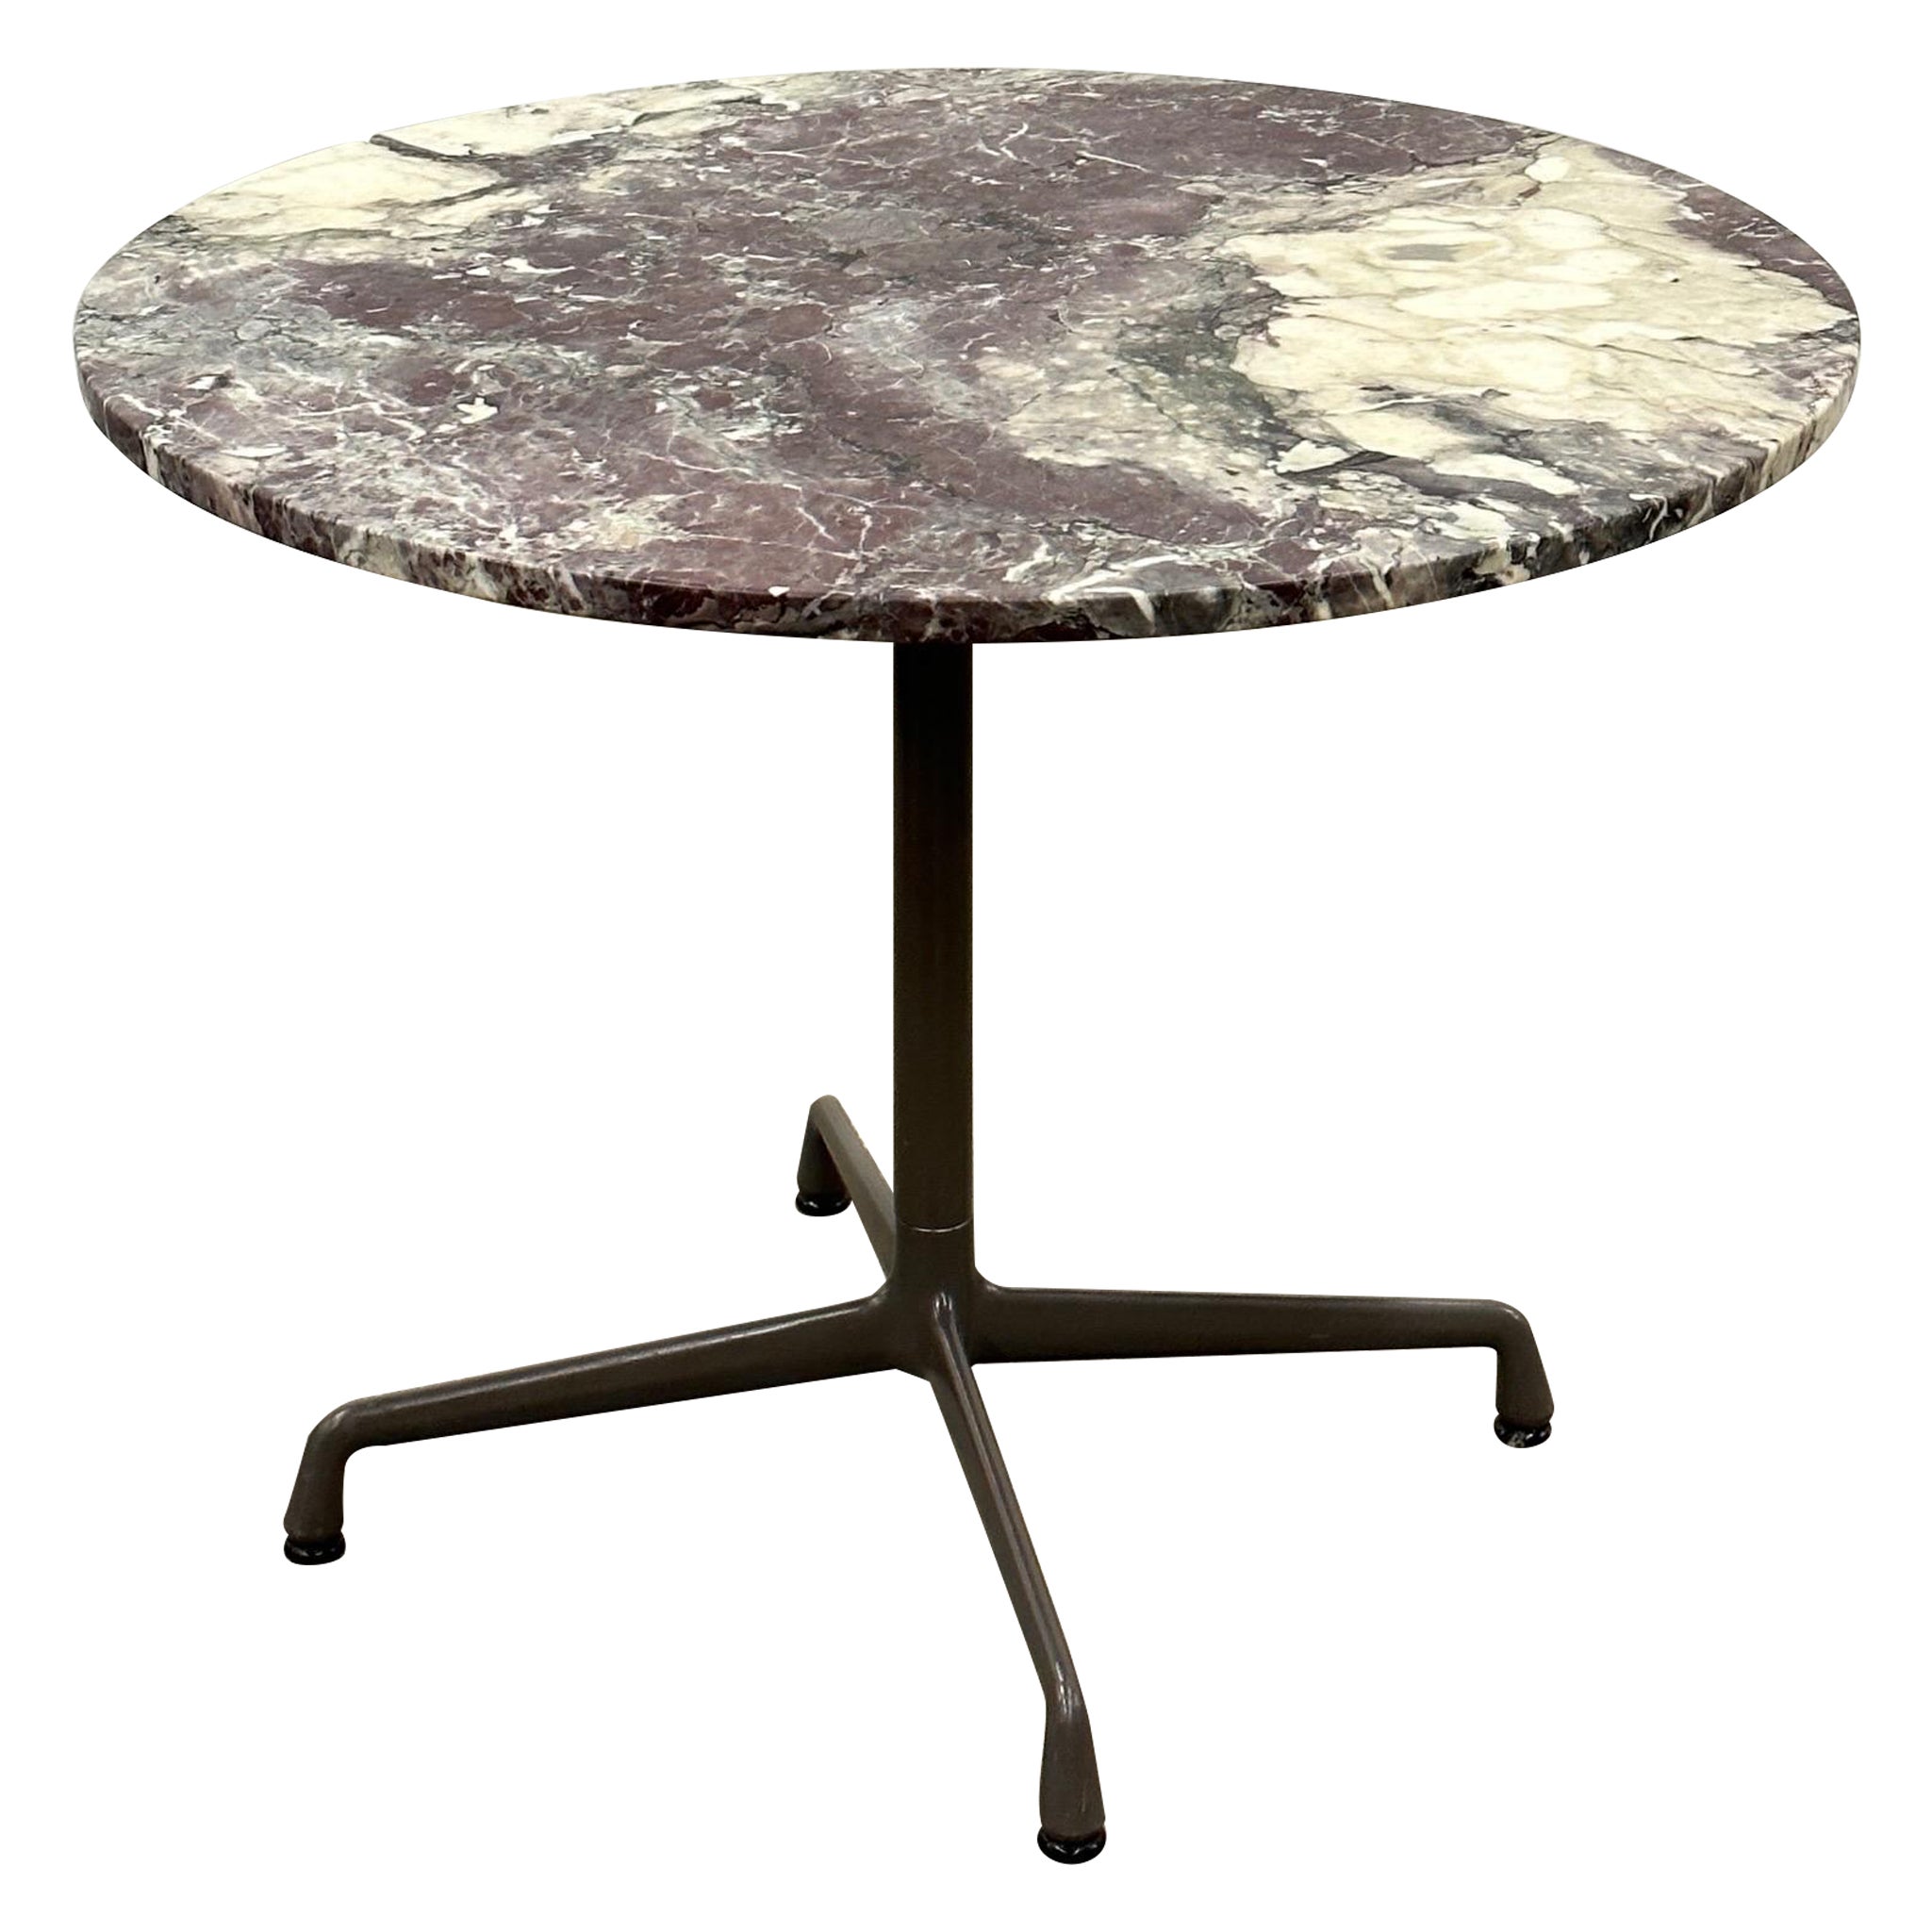 Aluminum Group Table by Charles and Ray Eames for Herman Miller with Purple Marb